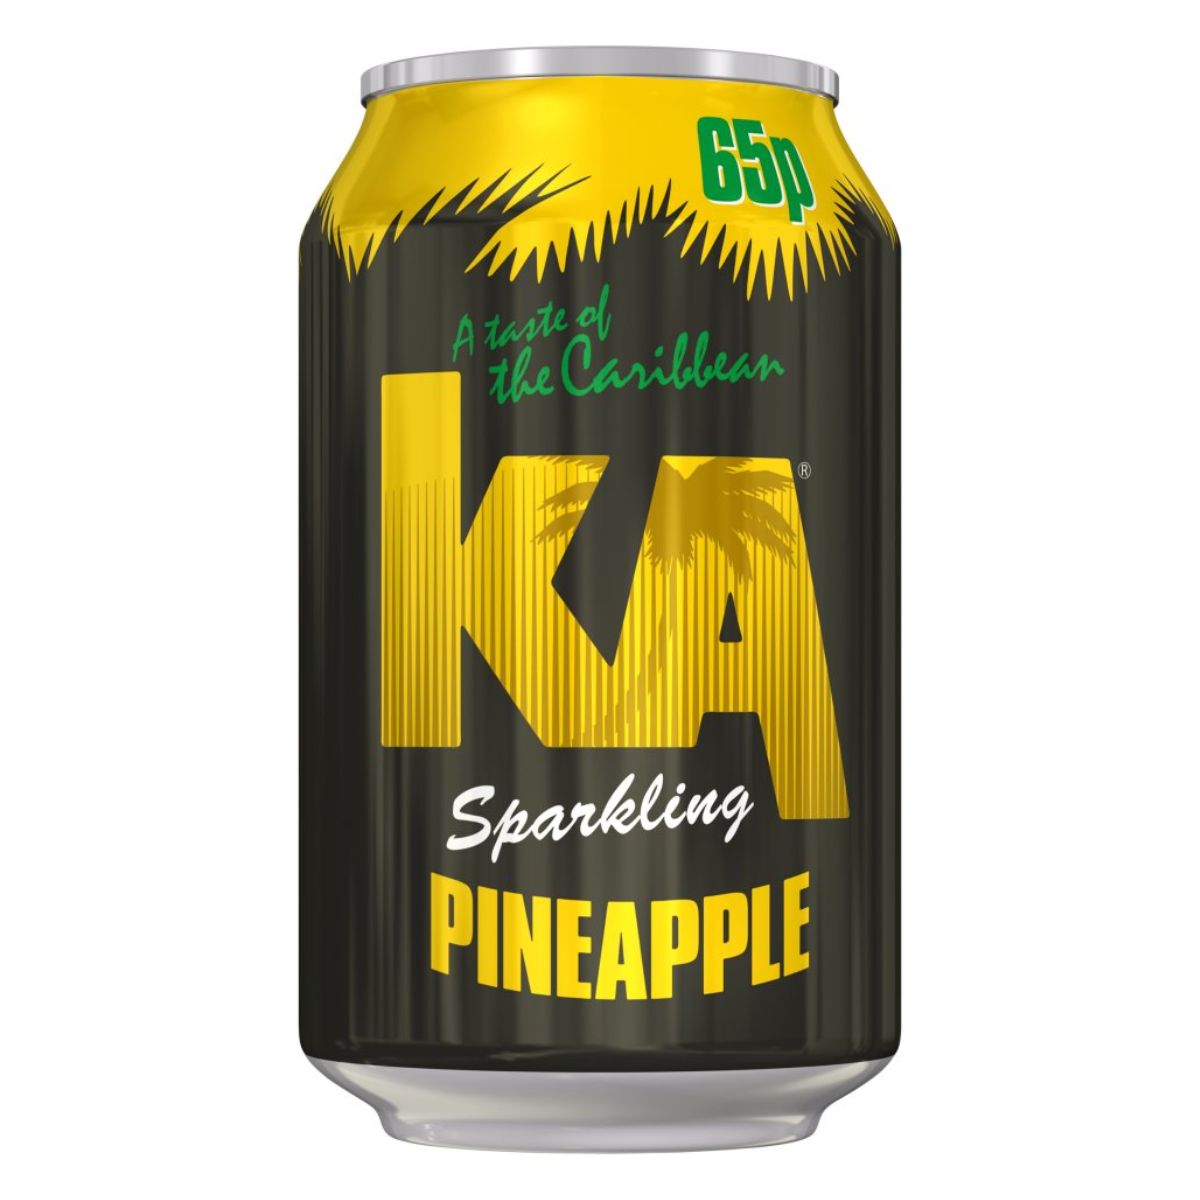 A can of KA Sparkling Pineapple featuring bold yellow and black graphics with tropical motifs and a price tag of 65p.